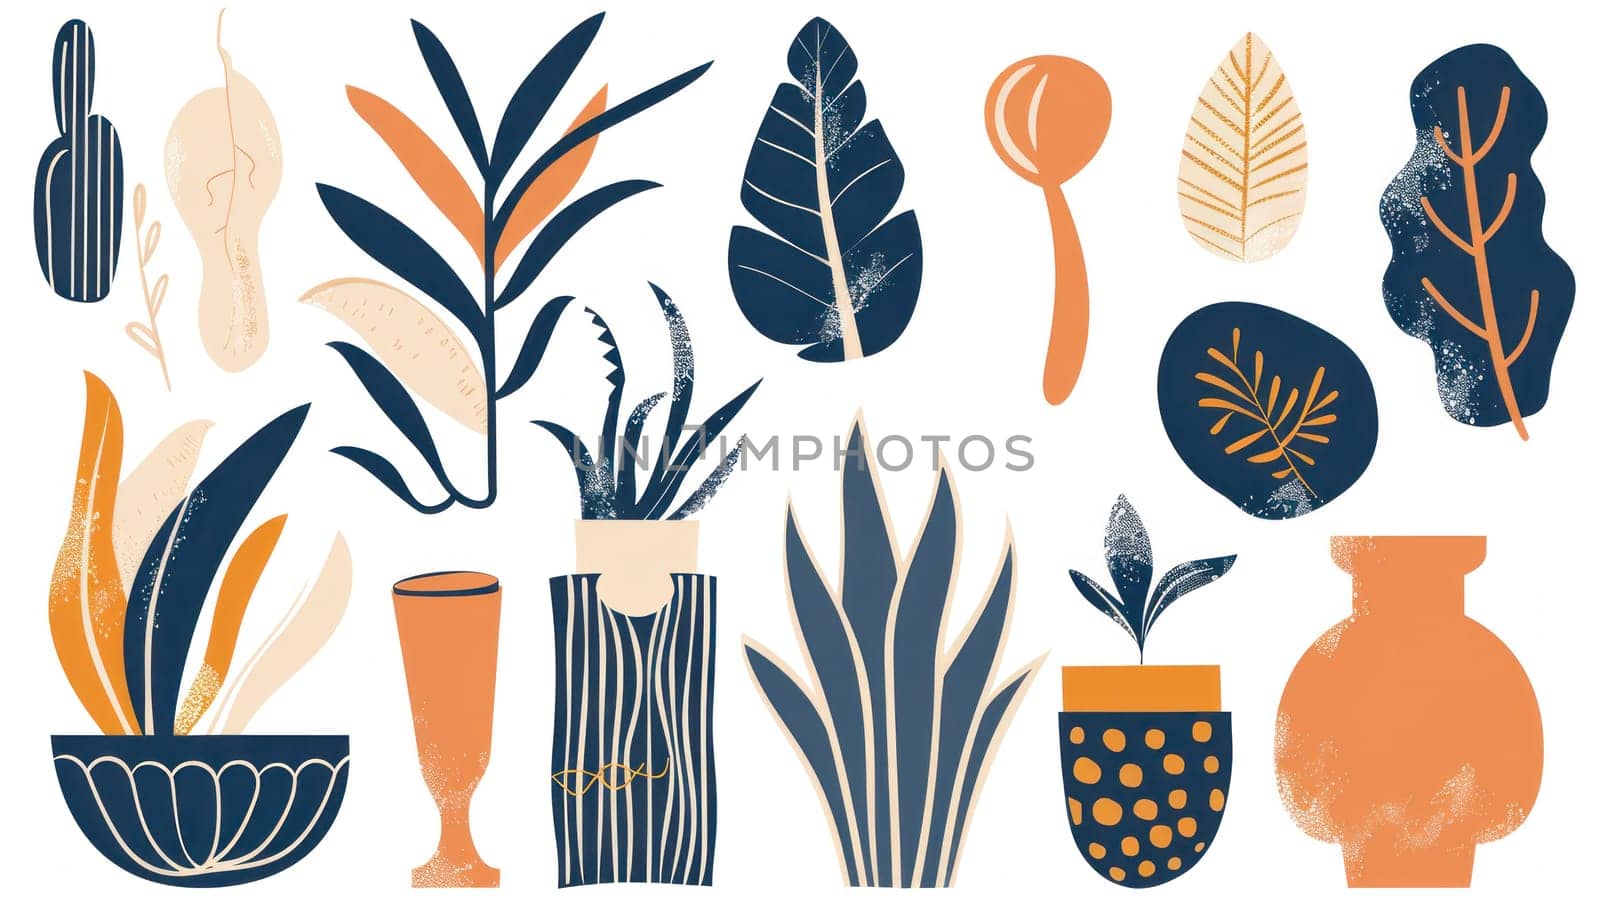 Collection of various plants and leaves in vases on white background for home decor and botanical design by Vichizh